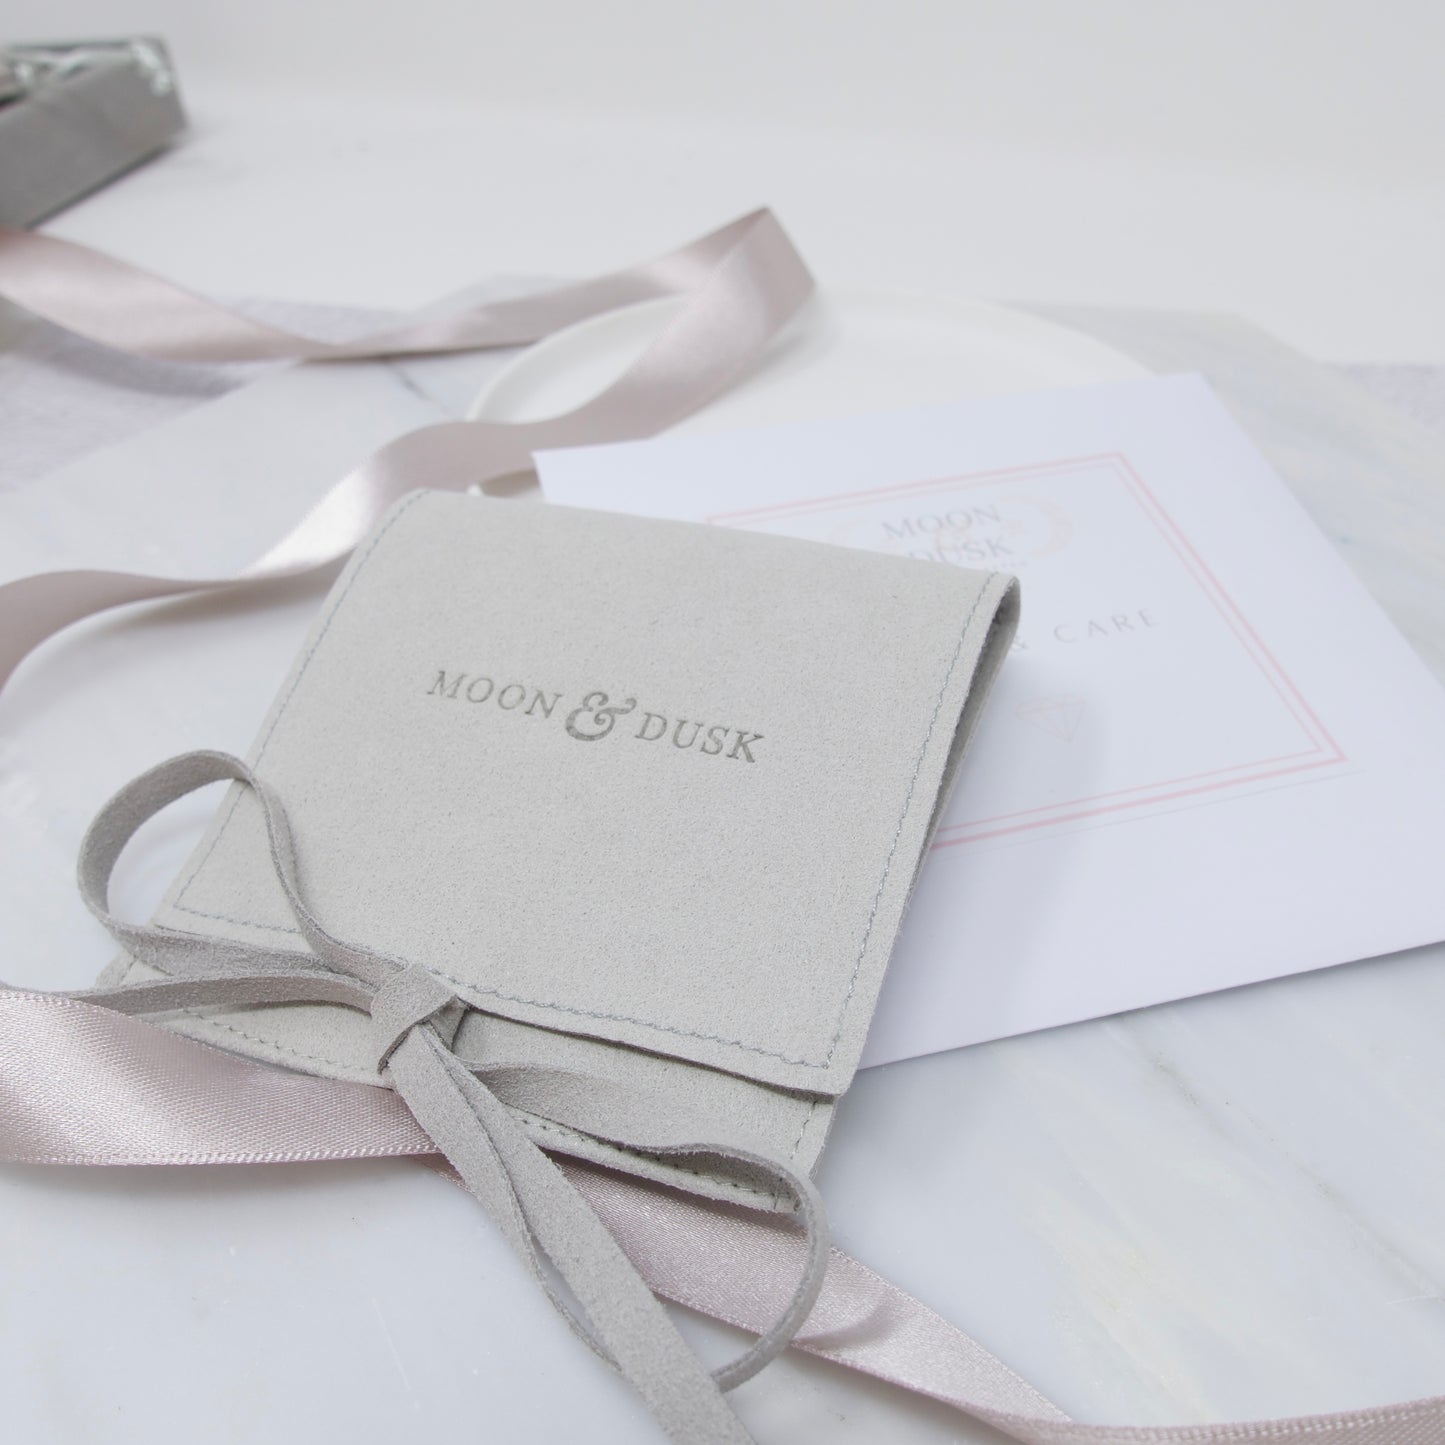 A soft grey Moon and Dusk jewellery pouch, tied with a bow, sitting on a care kit 